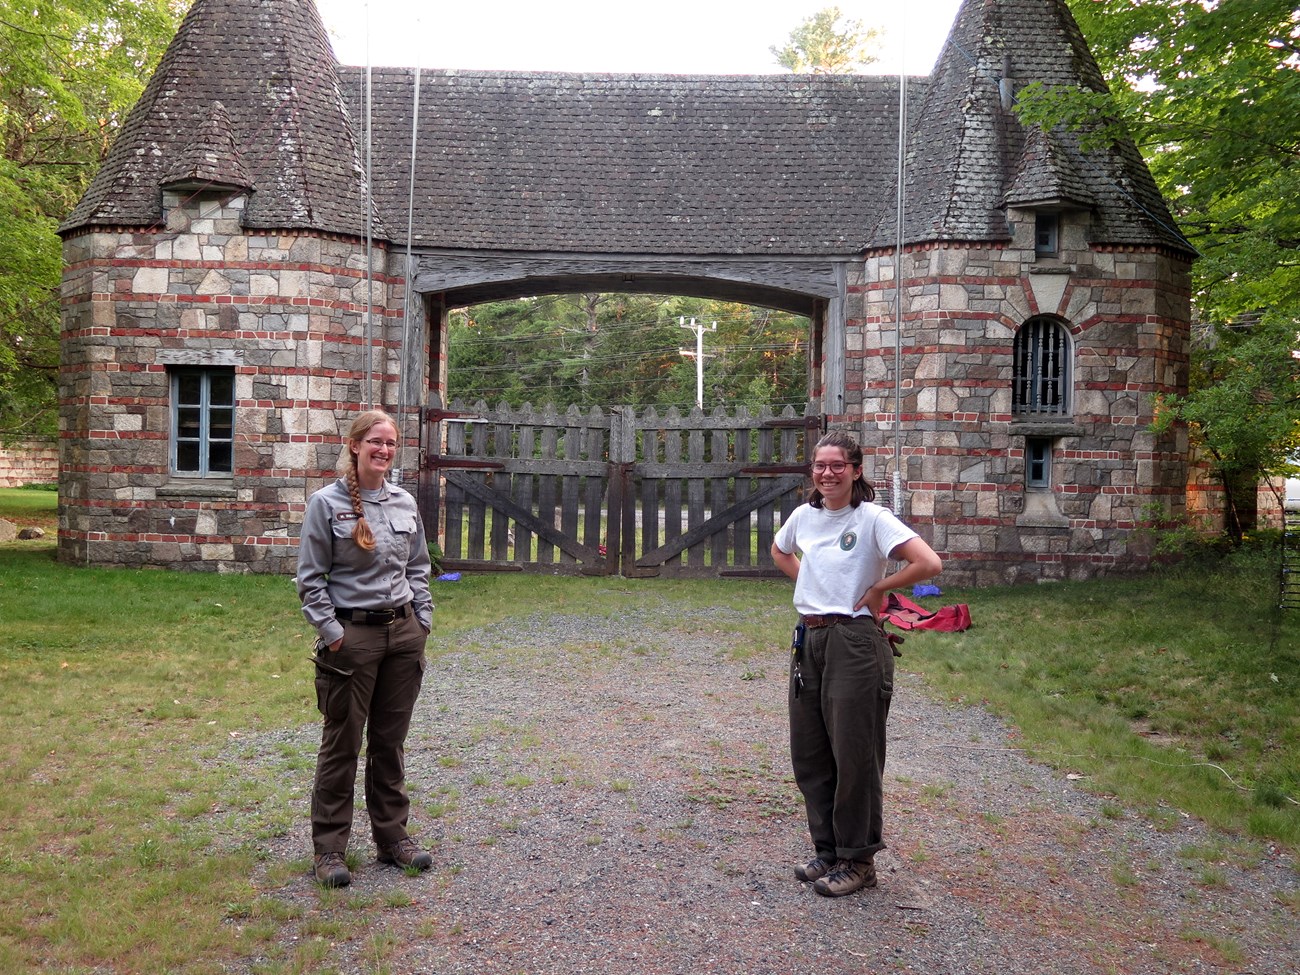 Two women standing in front of bat mist netting at Brown Mountain Gatehouse